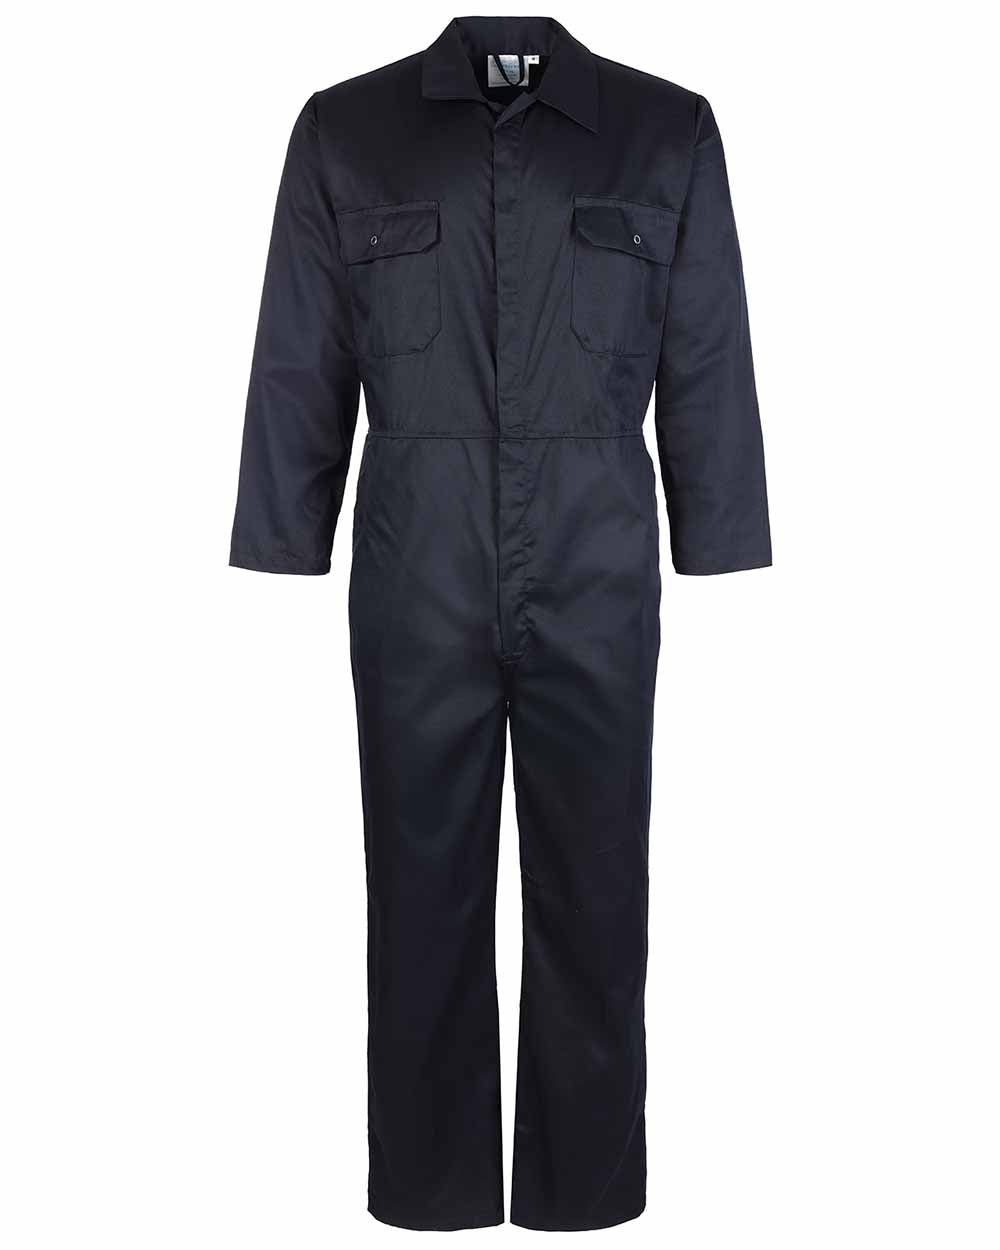 Navy coloured Fort Workforce Economy Boilersuit on white background 